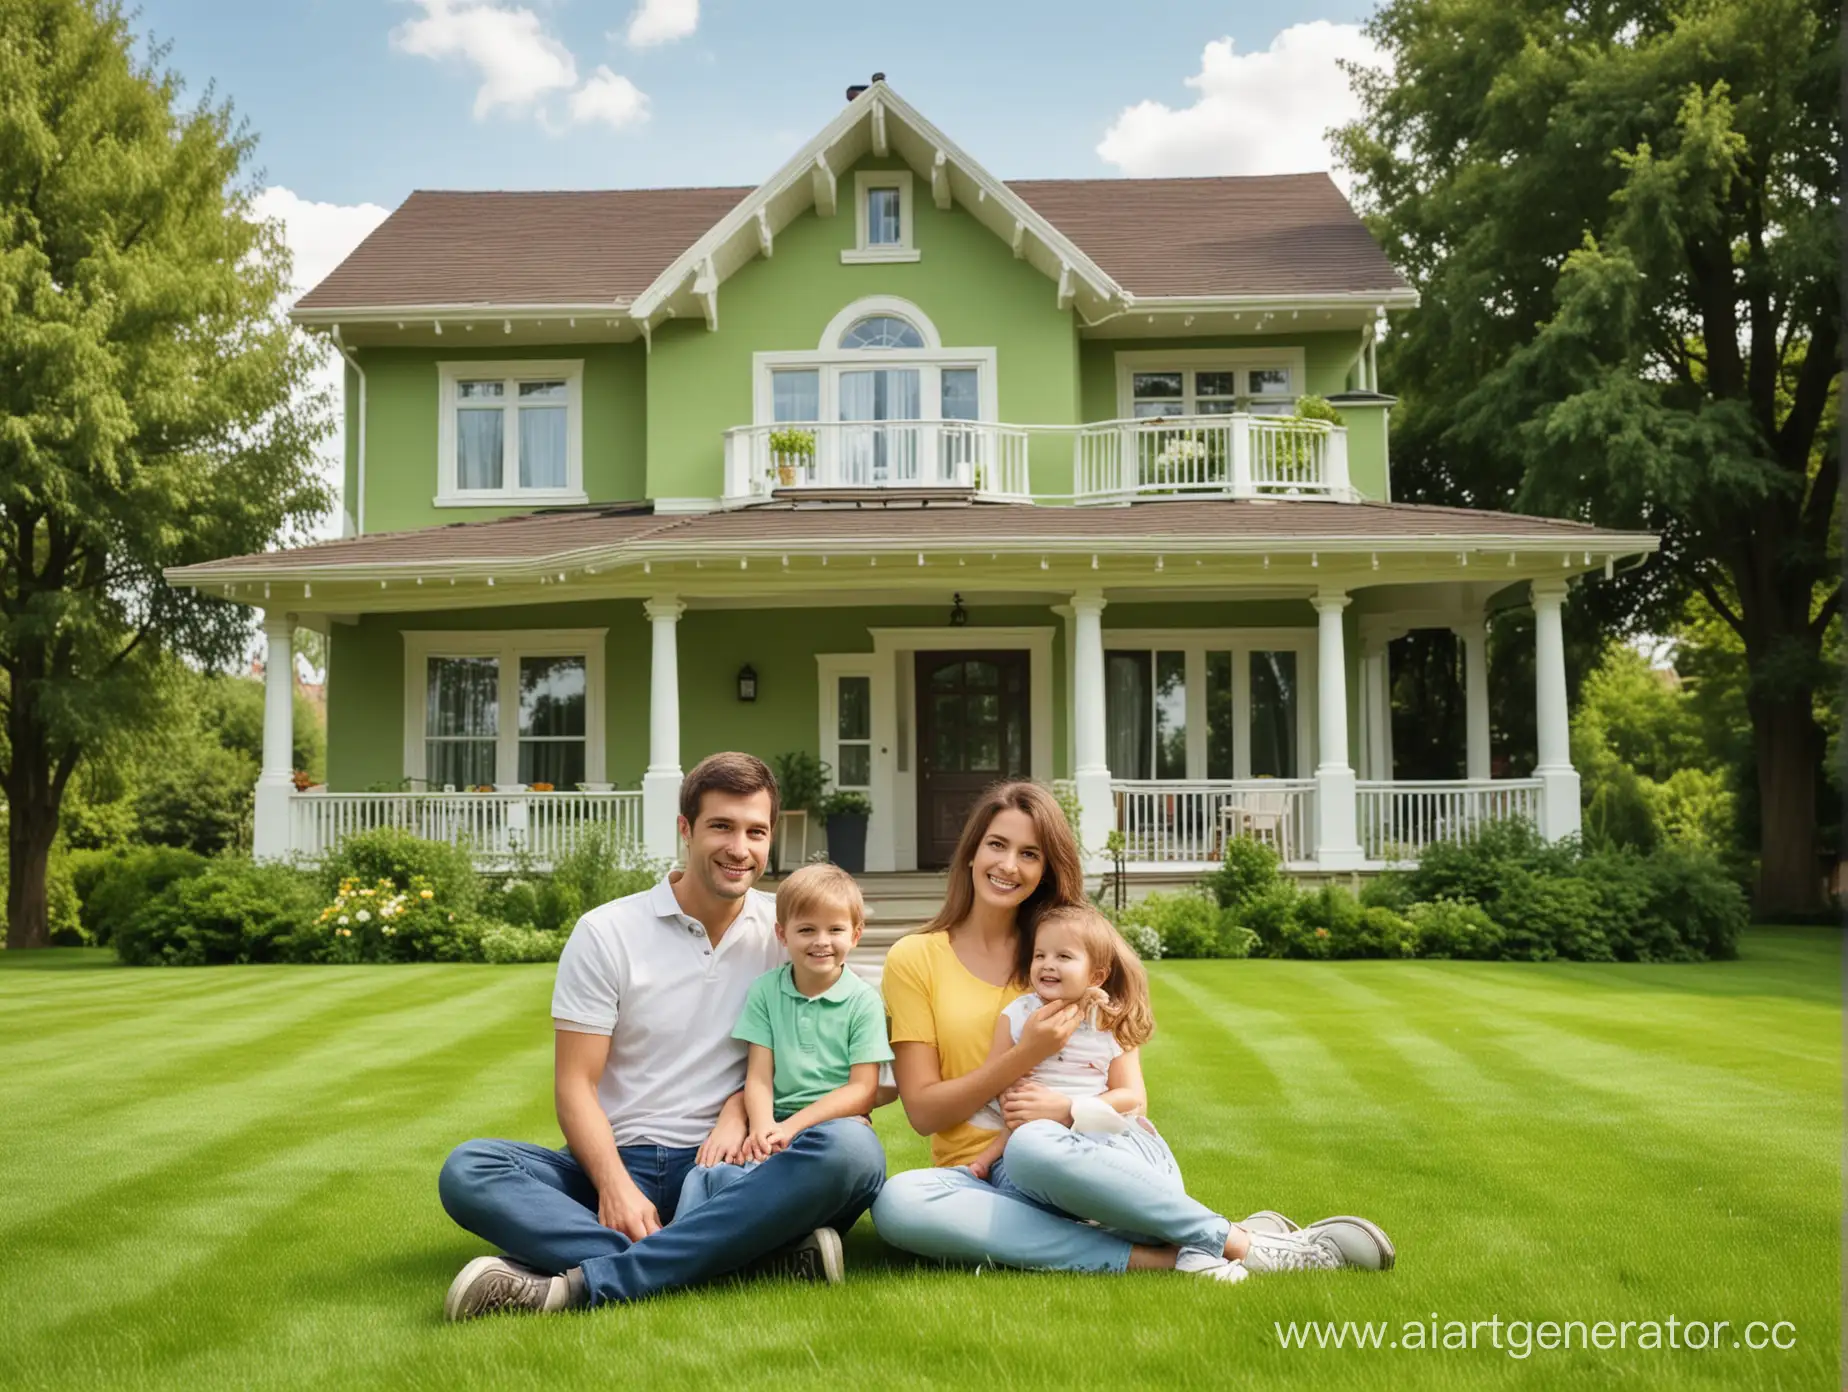 a big house, a green lawn, a happy family with a child